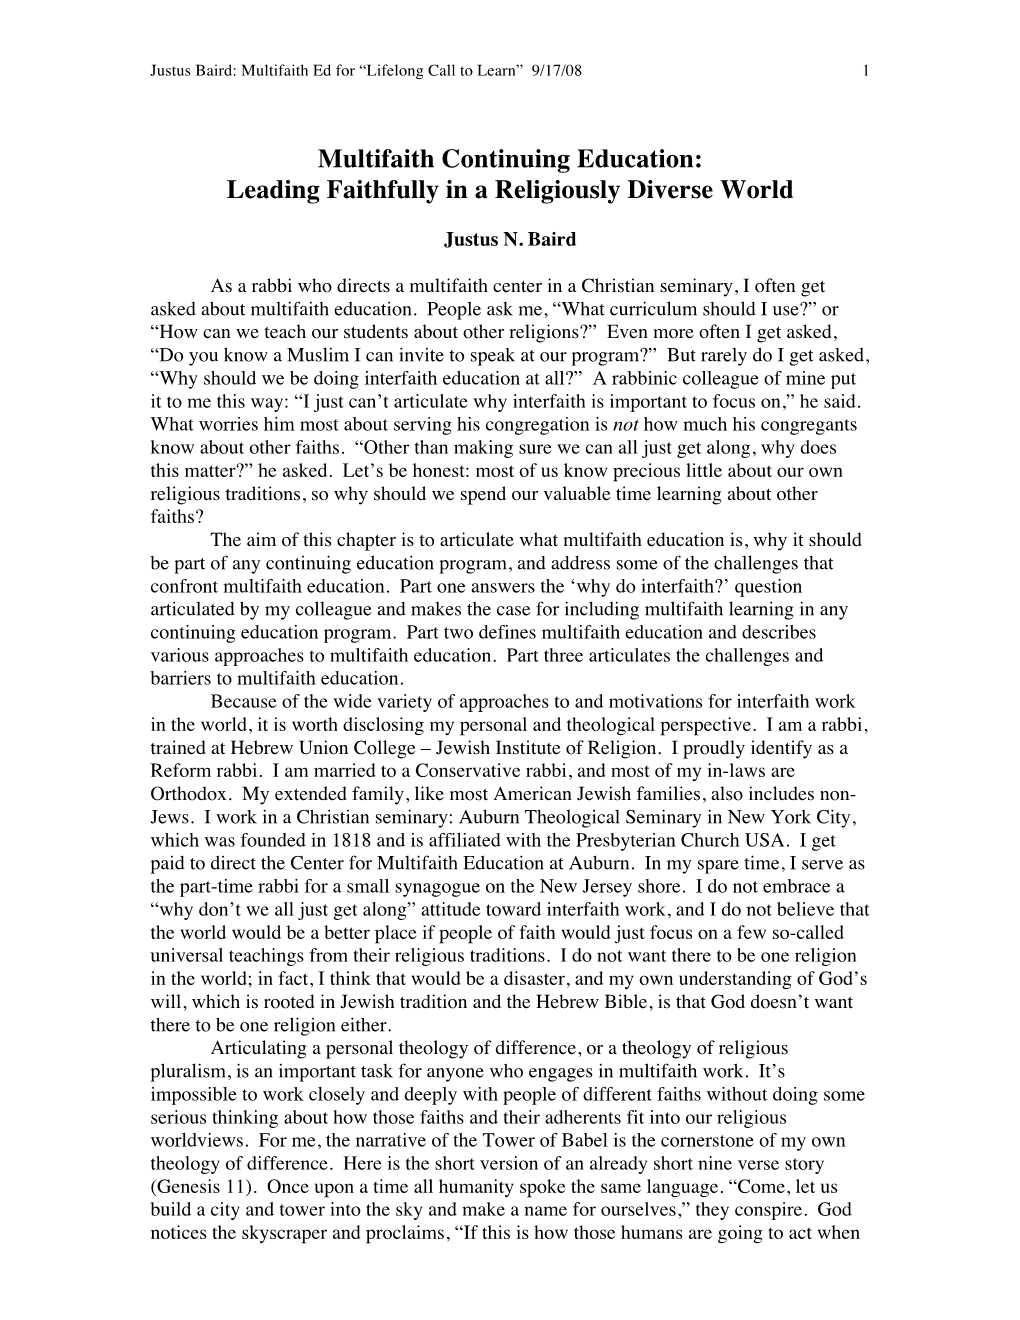 Multifaith Continuing Education: Leading Faithfully in a Religiously Diverse World